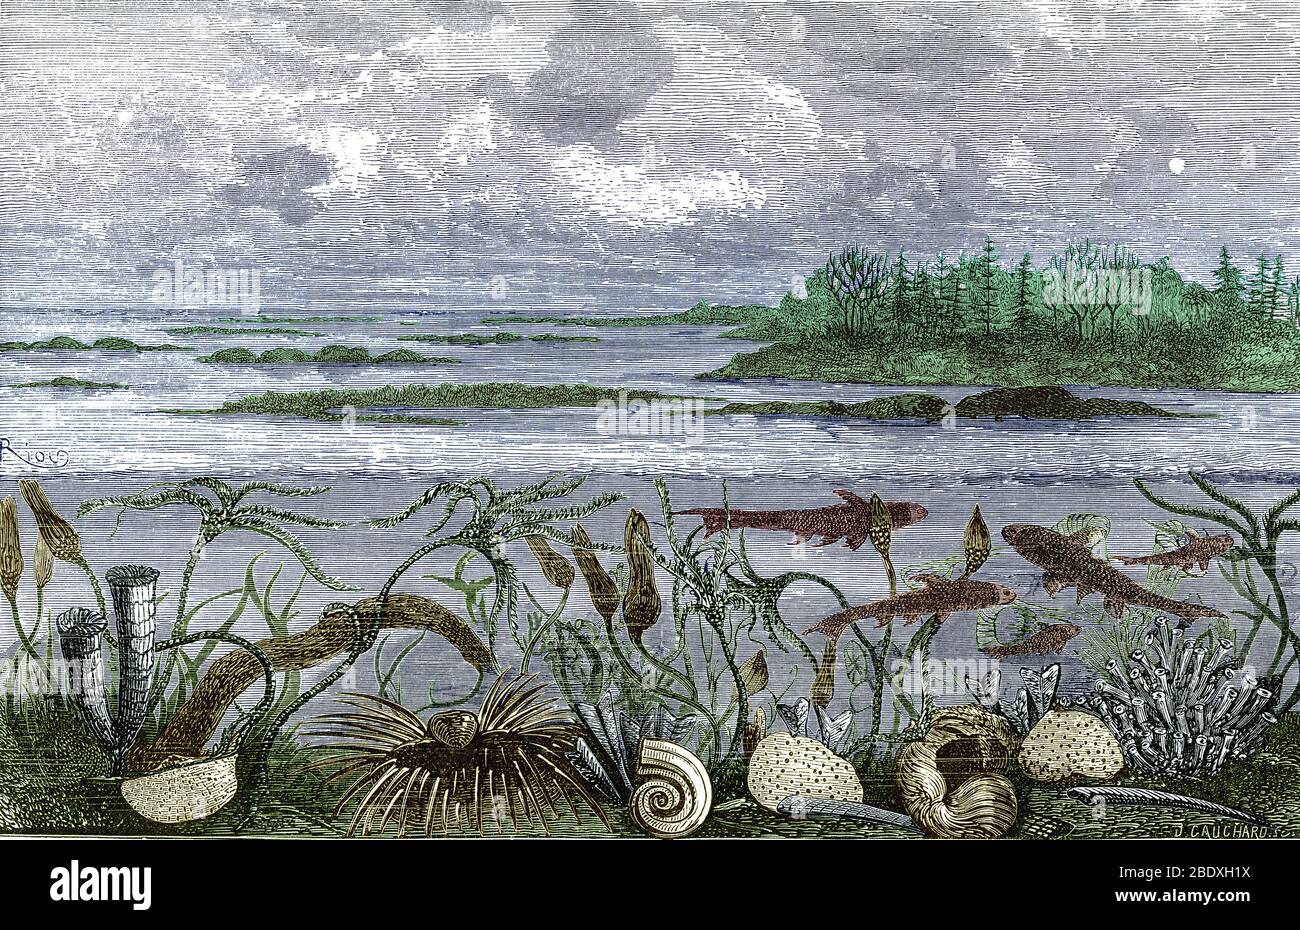 Ideal view of marine life from the Carboniferous Period, from Louis Figuier's The World Before the Deluge, 1867.  On the right are rugose corals (Lithostrotion) and sponges (Chaetetes and Plytopora).  The elongated tube in front of these is Aploceras, a nautiloid cephalopod.  In the center are a gastropod (Bellerophon hiculus), another nautiloid (Nautilus koninckii), and a brachiopod (Productus) with spines surrounding its shell. On the left are another brachiopod (Chonetes), more rugose corals (Cyathophyllum) and some crinoids (Cyathocrinus and Platycrinus) waving in the water. The fish are A Stock Photo